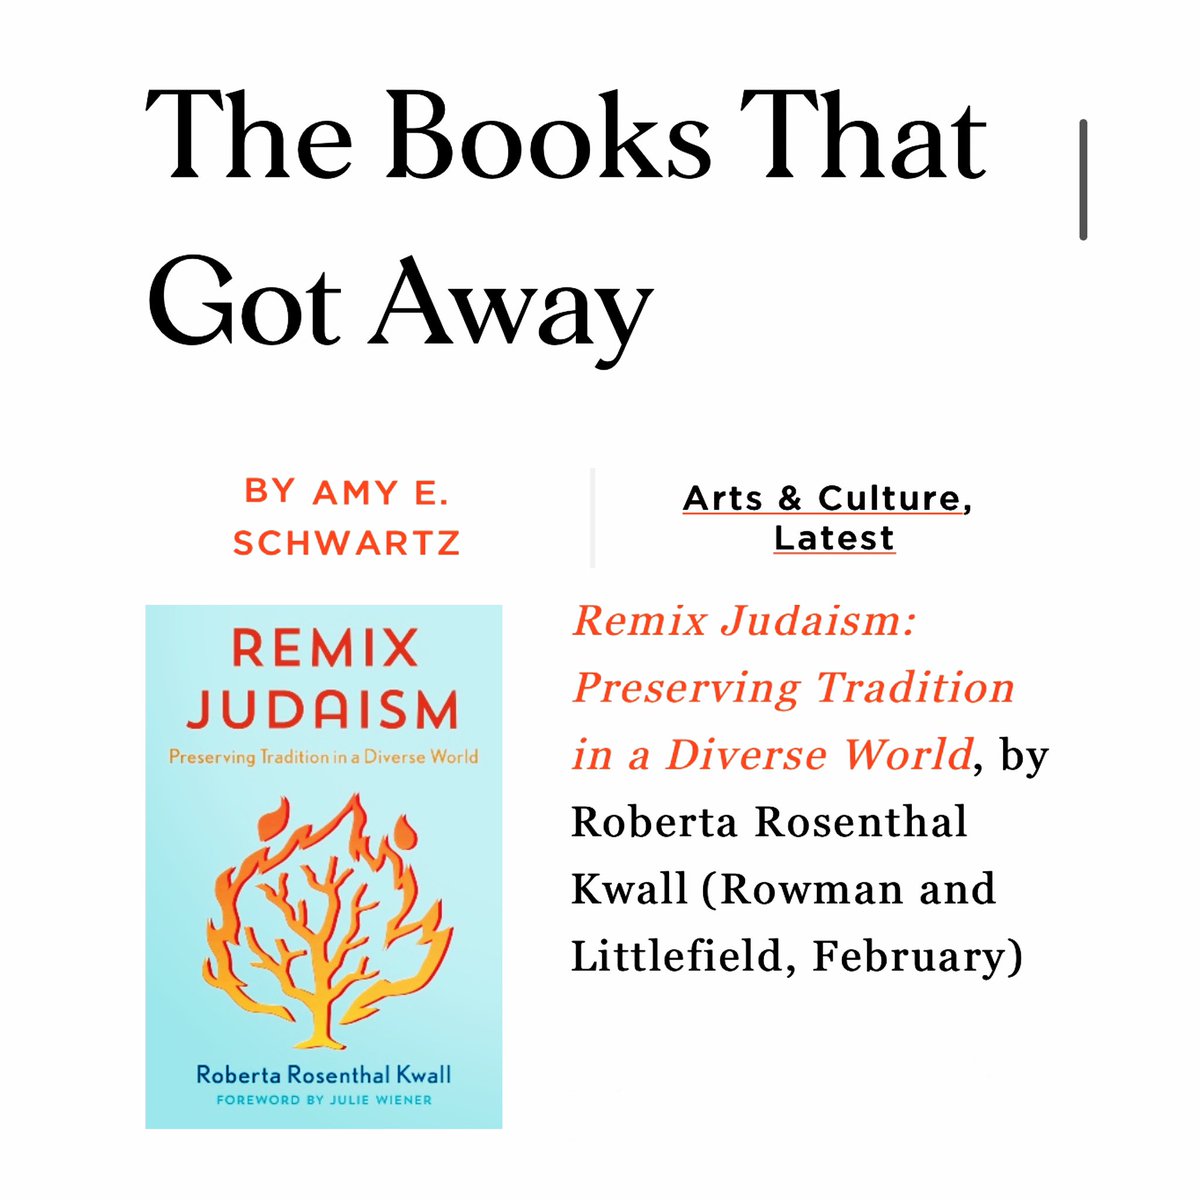 Huge thx @MomentMagazine book ed Amy Schwartz including @robertakwall’s REMIX JUDAISM @RLPGBooks among her fave reads of 2020! “If you missed these 📚 in 2020, they’ll be just as good in 2021.” momentmag.com/books-that-got…

#Jewish #culture #tbr #books📚 #bestof2020 #mustread